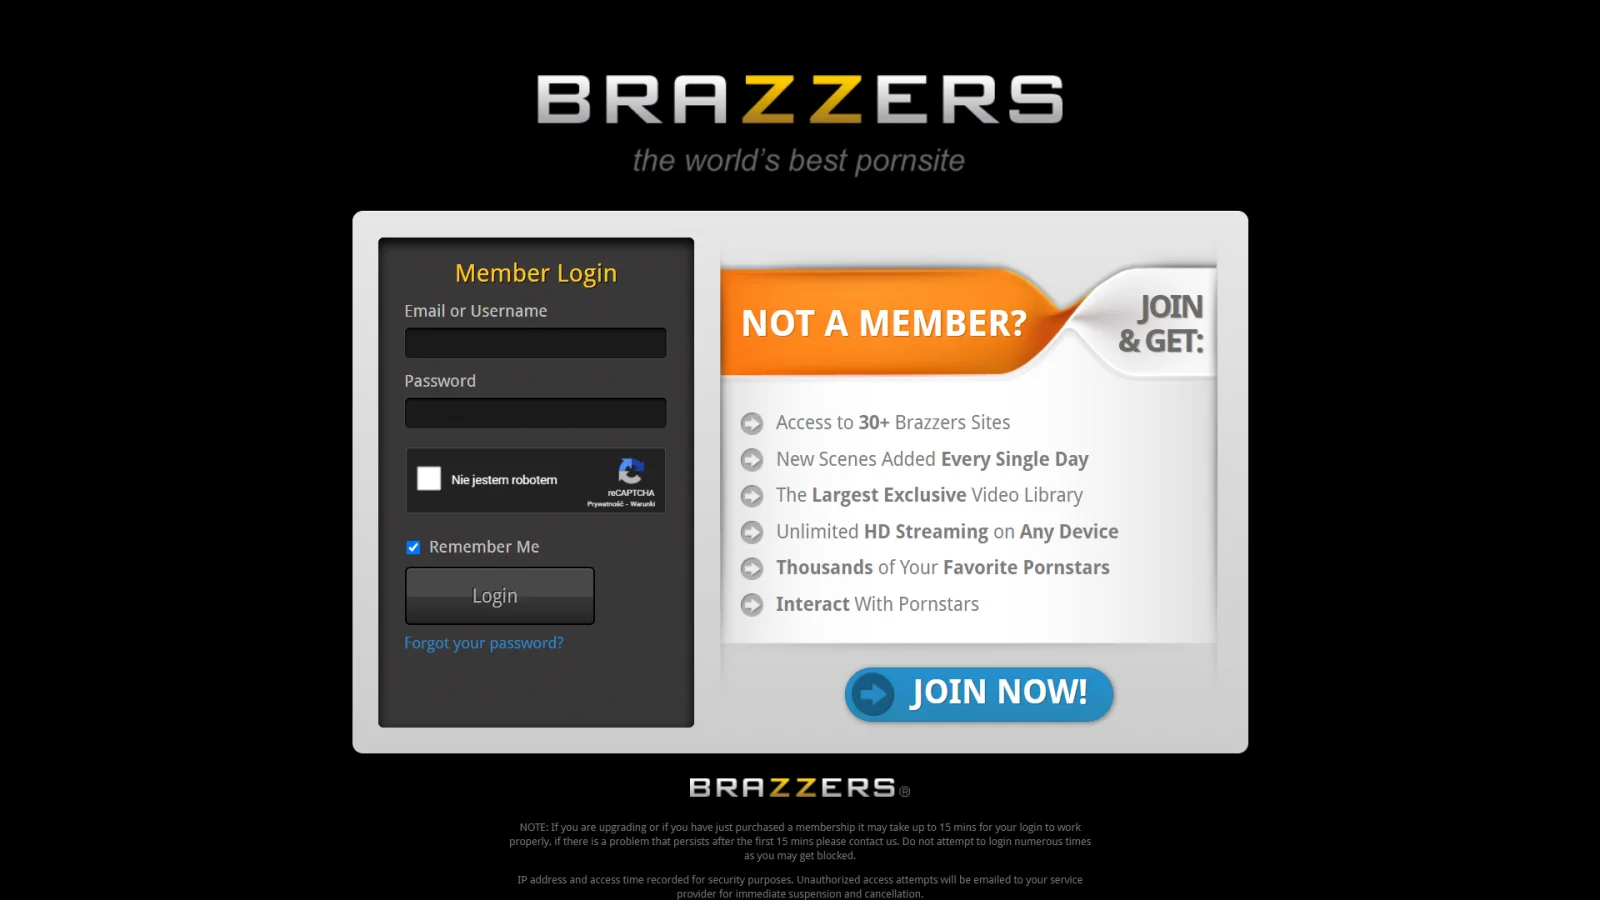 How to get brazzers for free